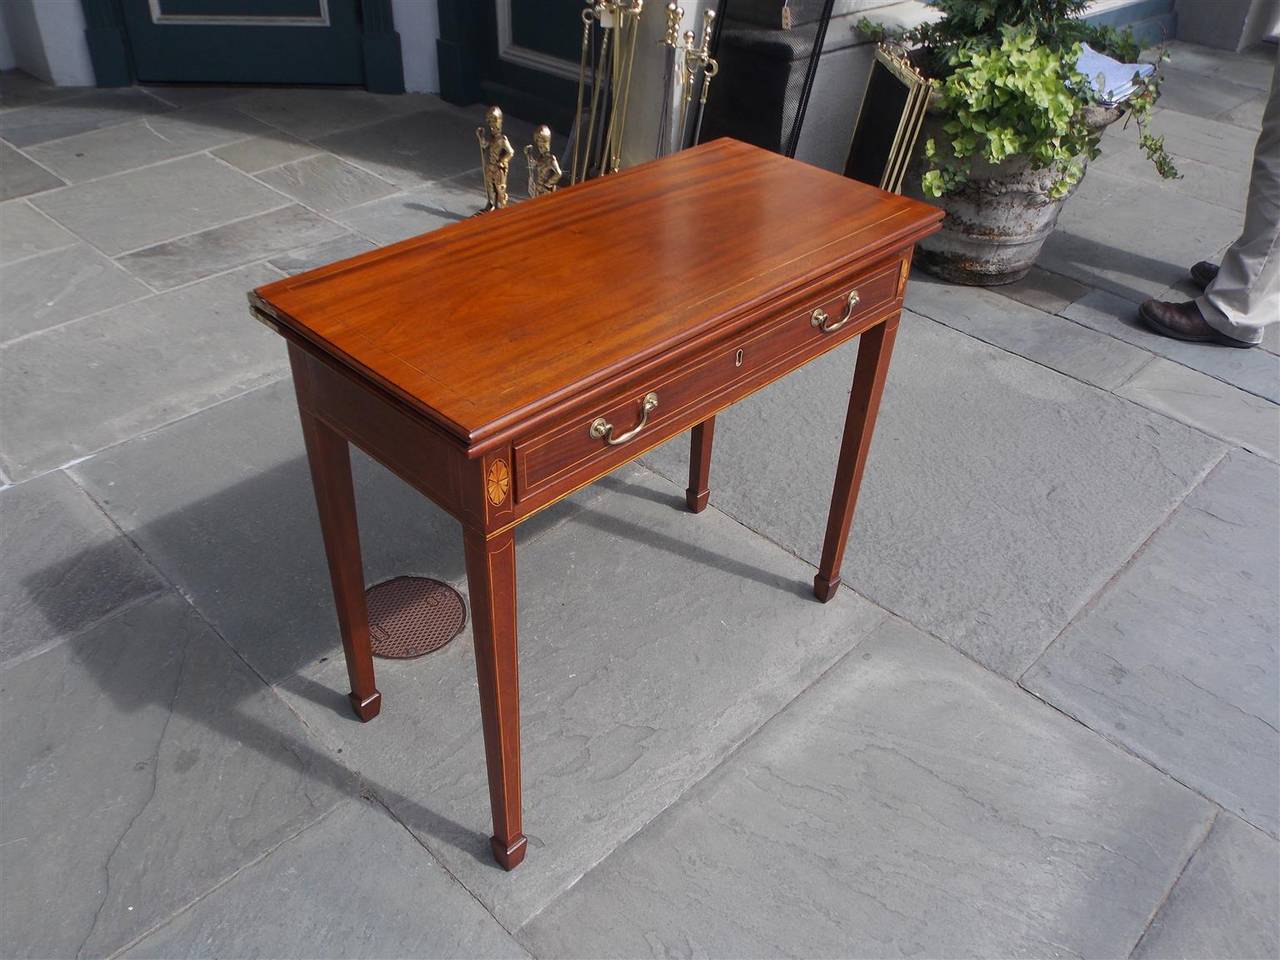 American mahogany one board hinged top single-drawer card table with original brass pulls, satinwood string inlay, corner patera's, and terminating on squared tapered legs with spade feet. Table has gate leg to support top when open, Early 19th